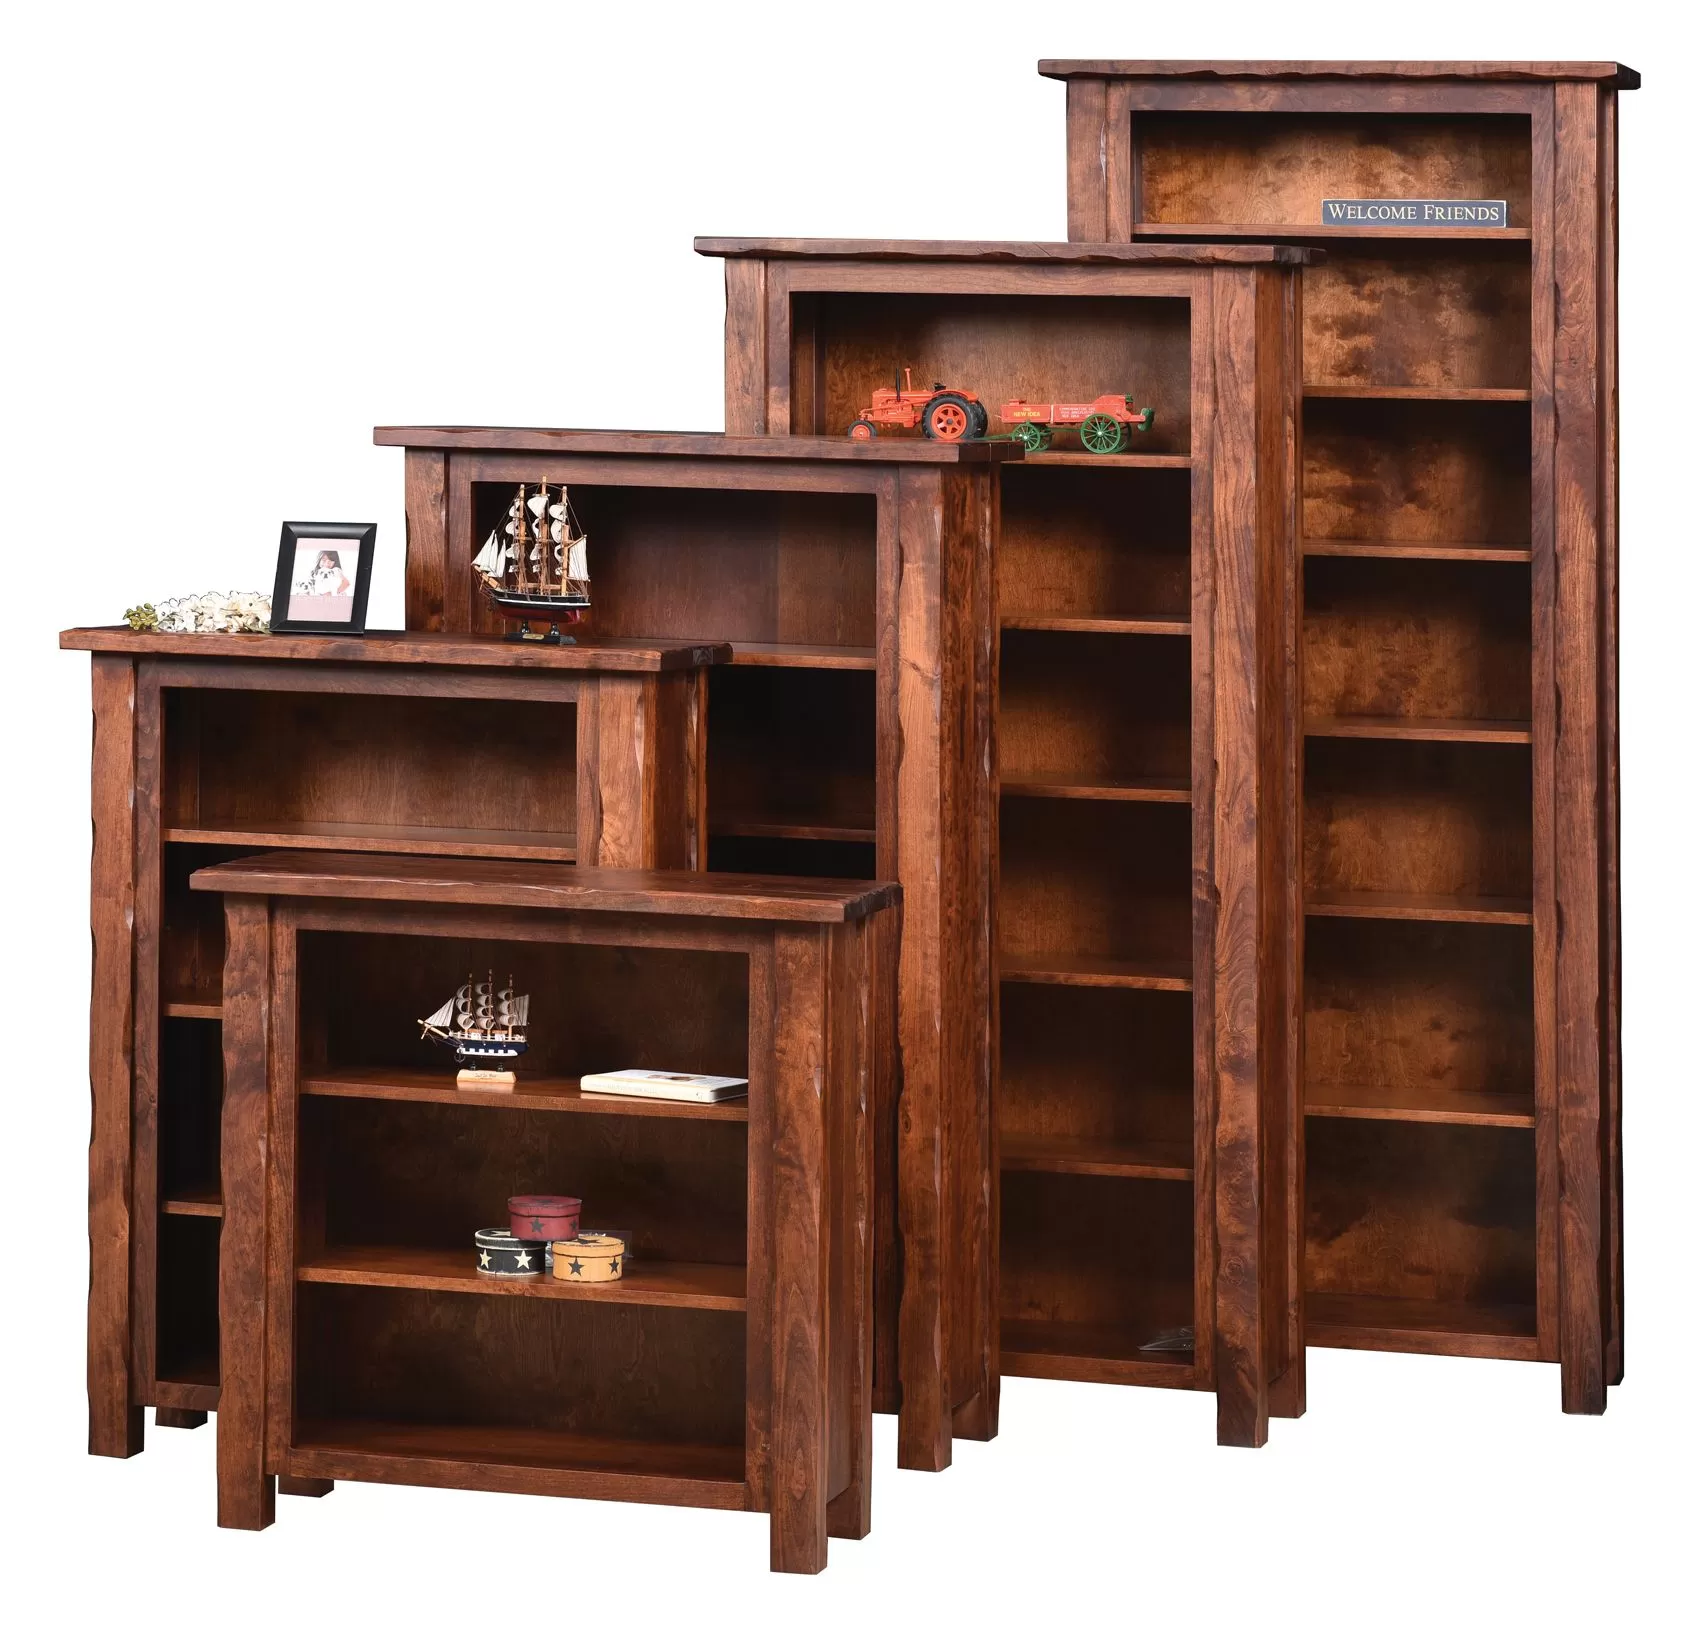 36" Hand Hewn Open Bookcases